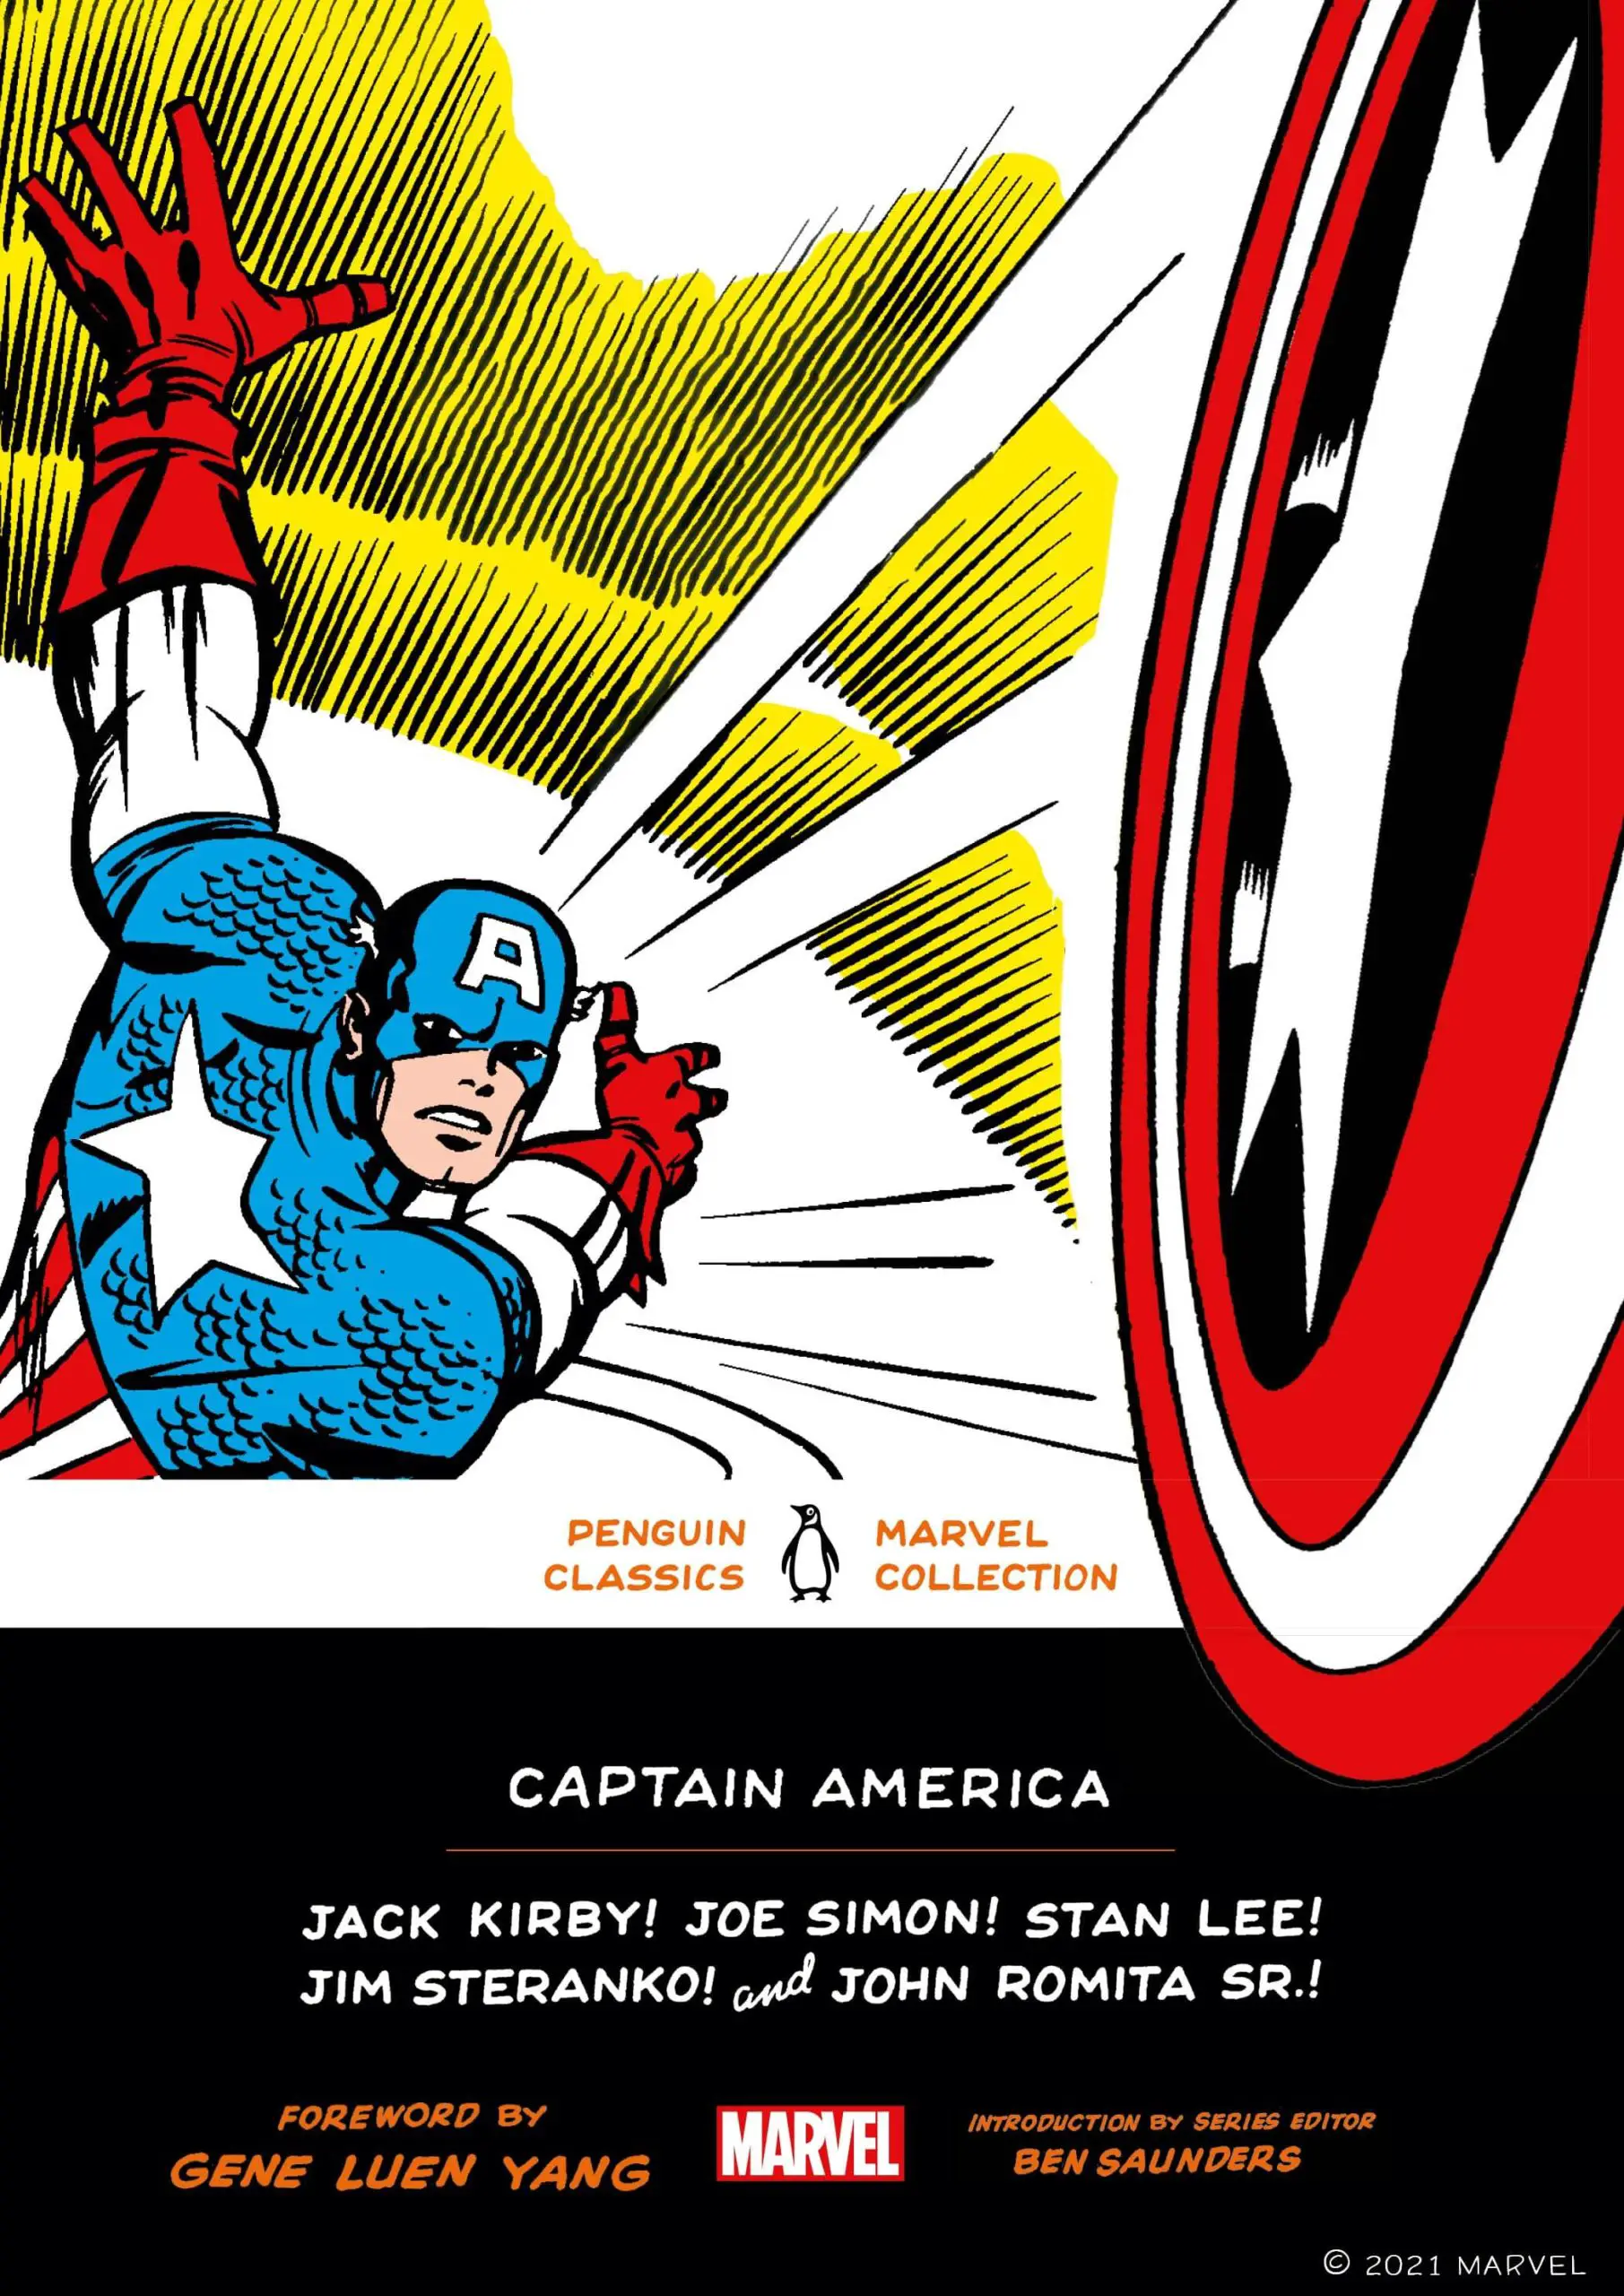 Captain America includes a foreword by Gene Luen Yang, the fifth National Ambassador for Young People’s Literature, and the author of Shang Chi for Marvel Comics and American Born Chinese.